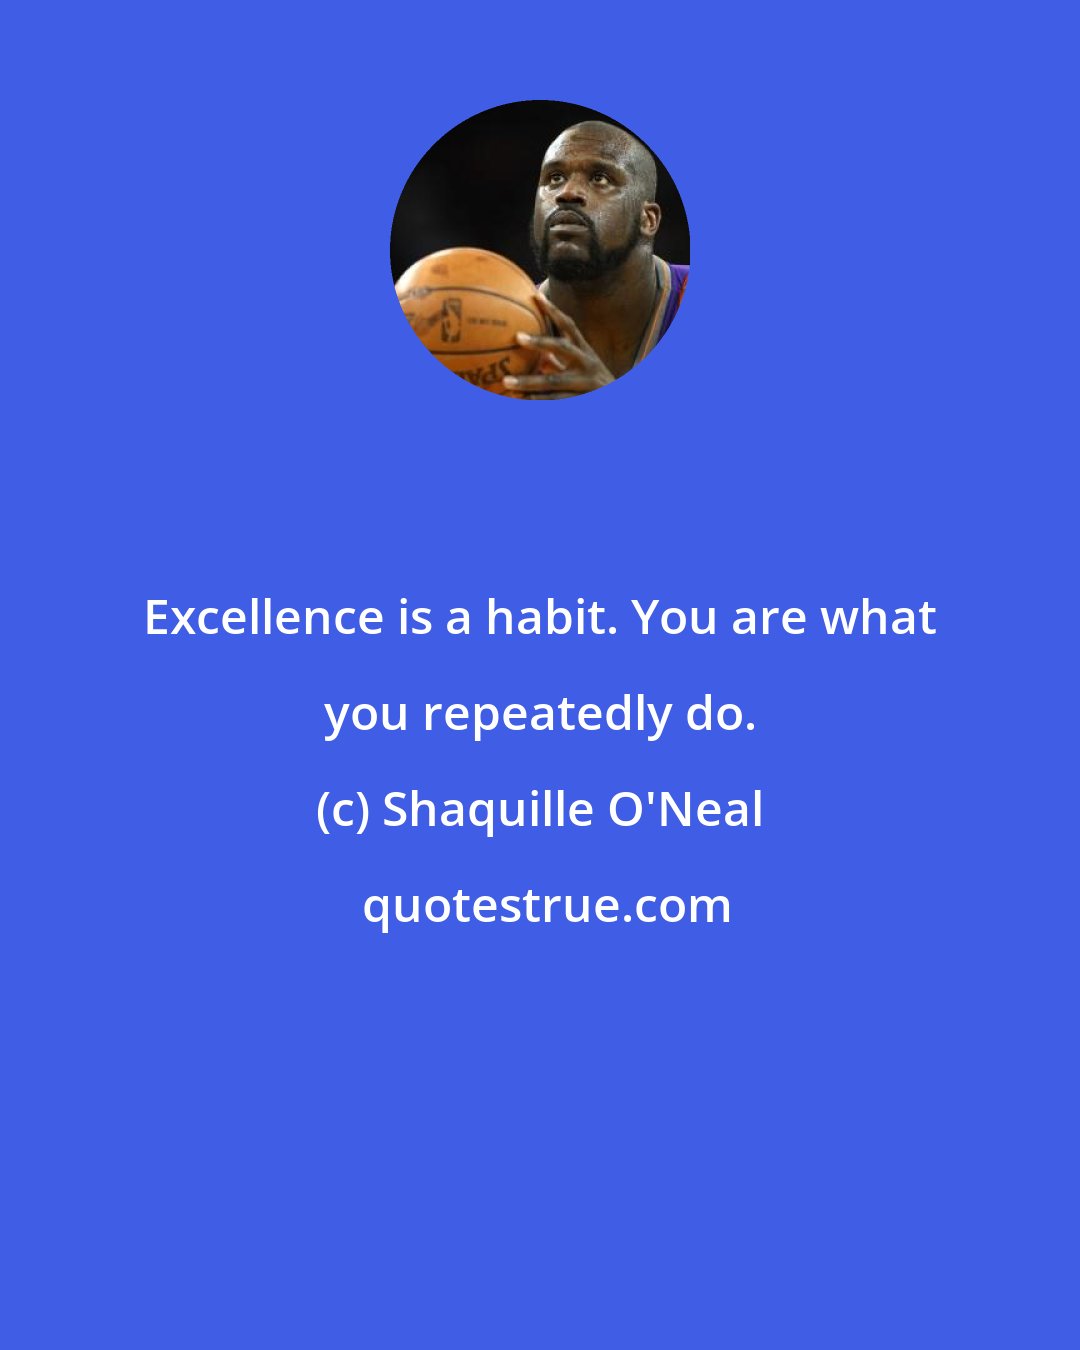 Shaquille O'Neal: Excellence is a habit. You are what you repeatedly do.